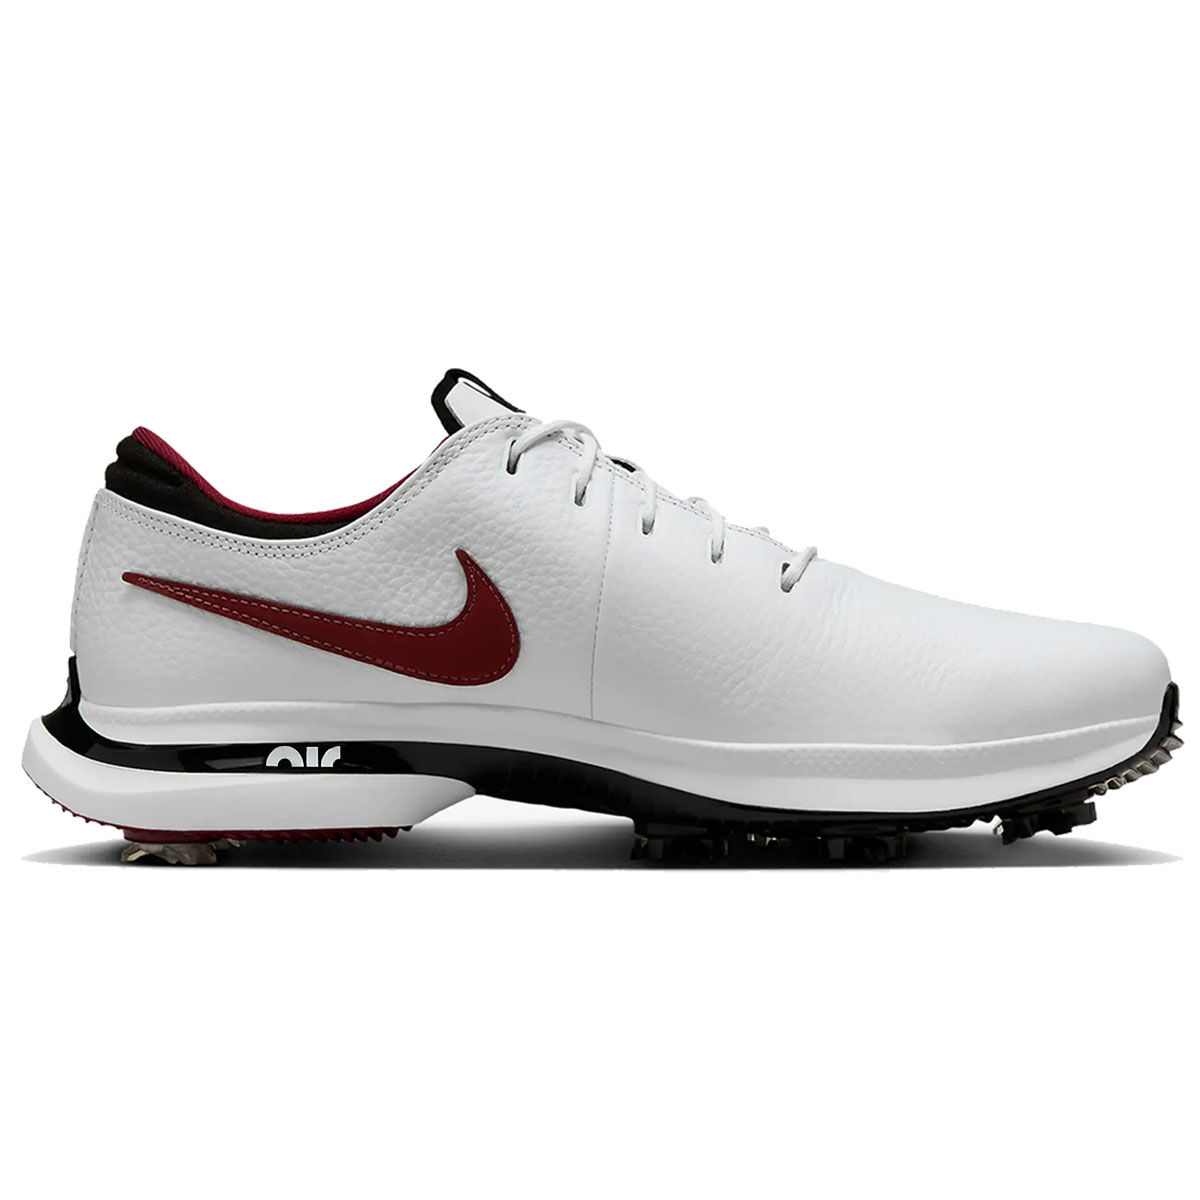 Nike Air Zoom Victory Tour 3 Waterproof Spiked Golf Shoes, Mens, White/red/black, 11 | American Golf von Nike Golf